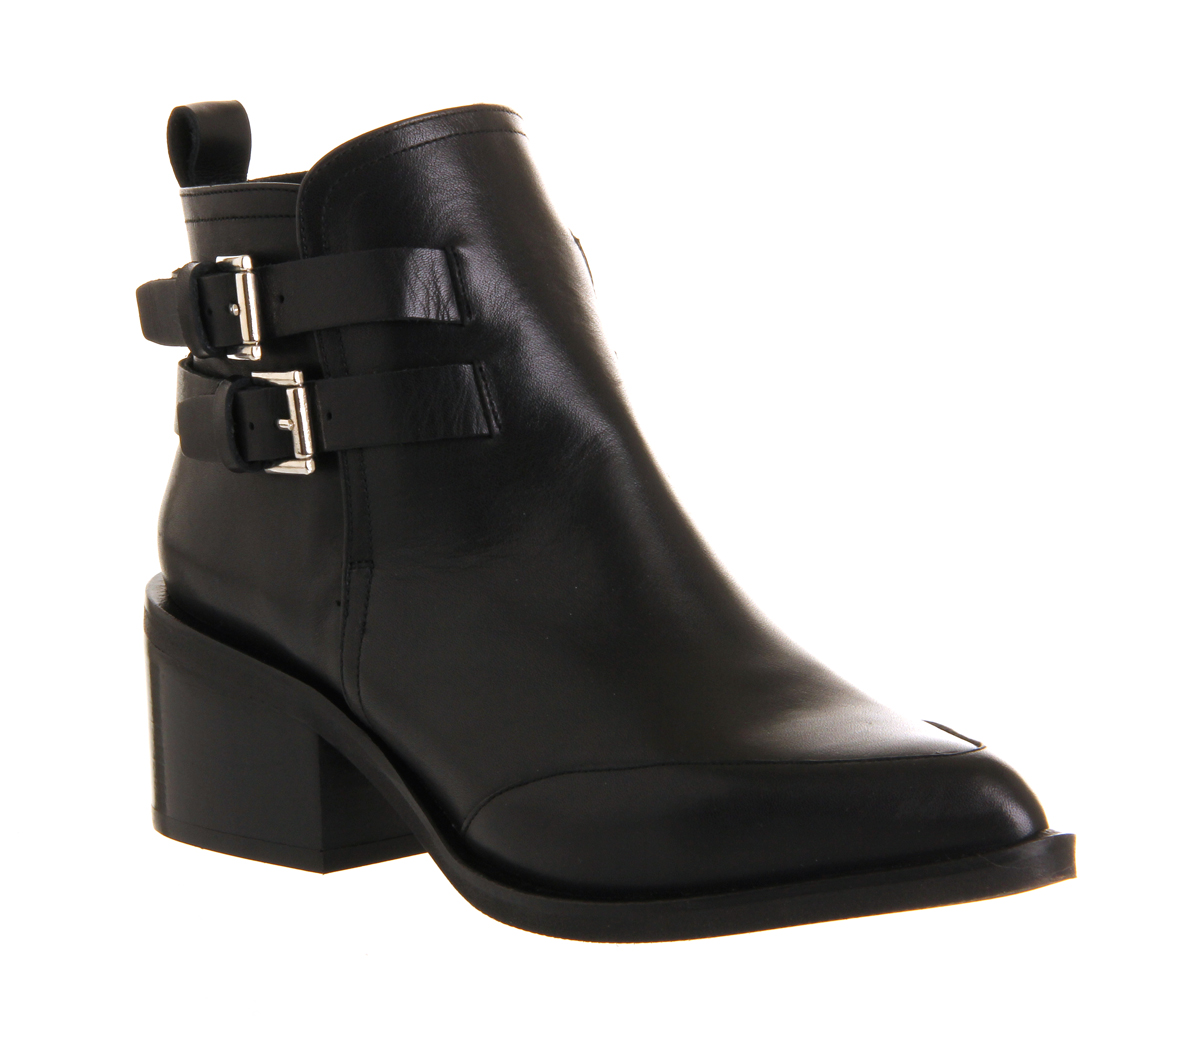 OFFICE Marvel Double Buckle boots Black Leather - Women's Ankle Boots